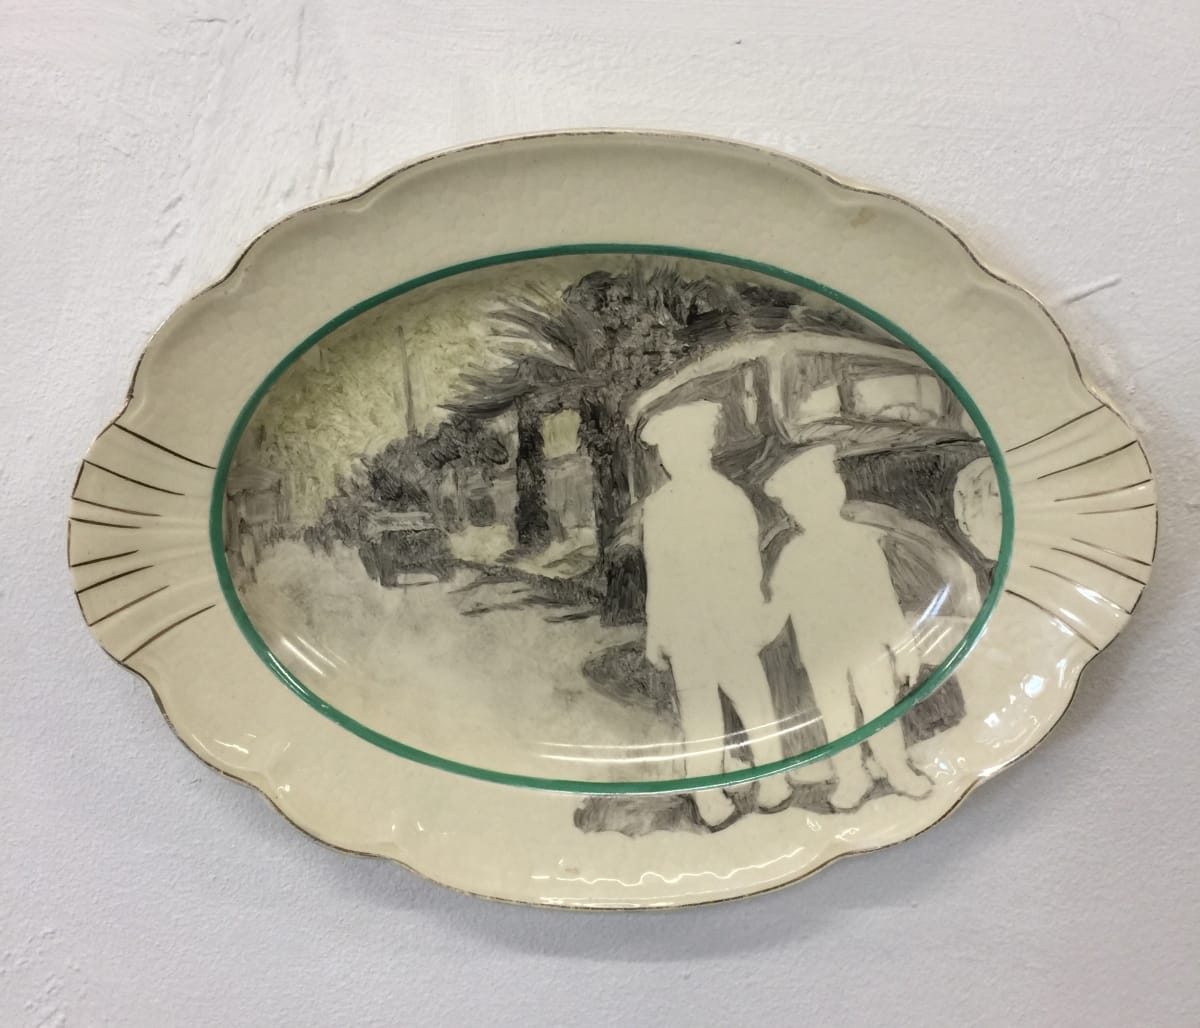 Local Children by the Suez by annekwasner@gmail.com  Image: Upcycled plate hand painted with onglaze from a photo found on the internet of anonymous children